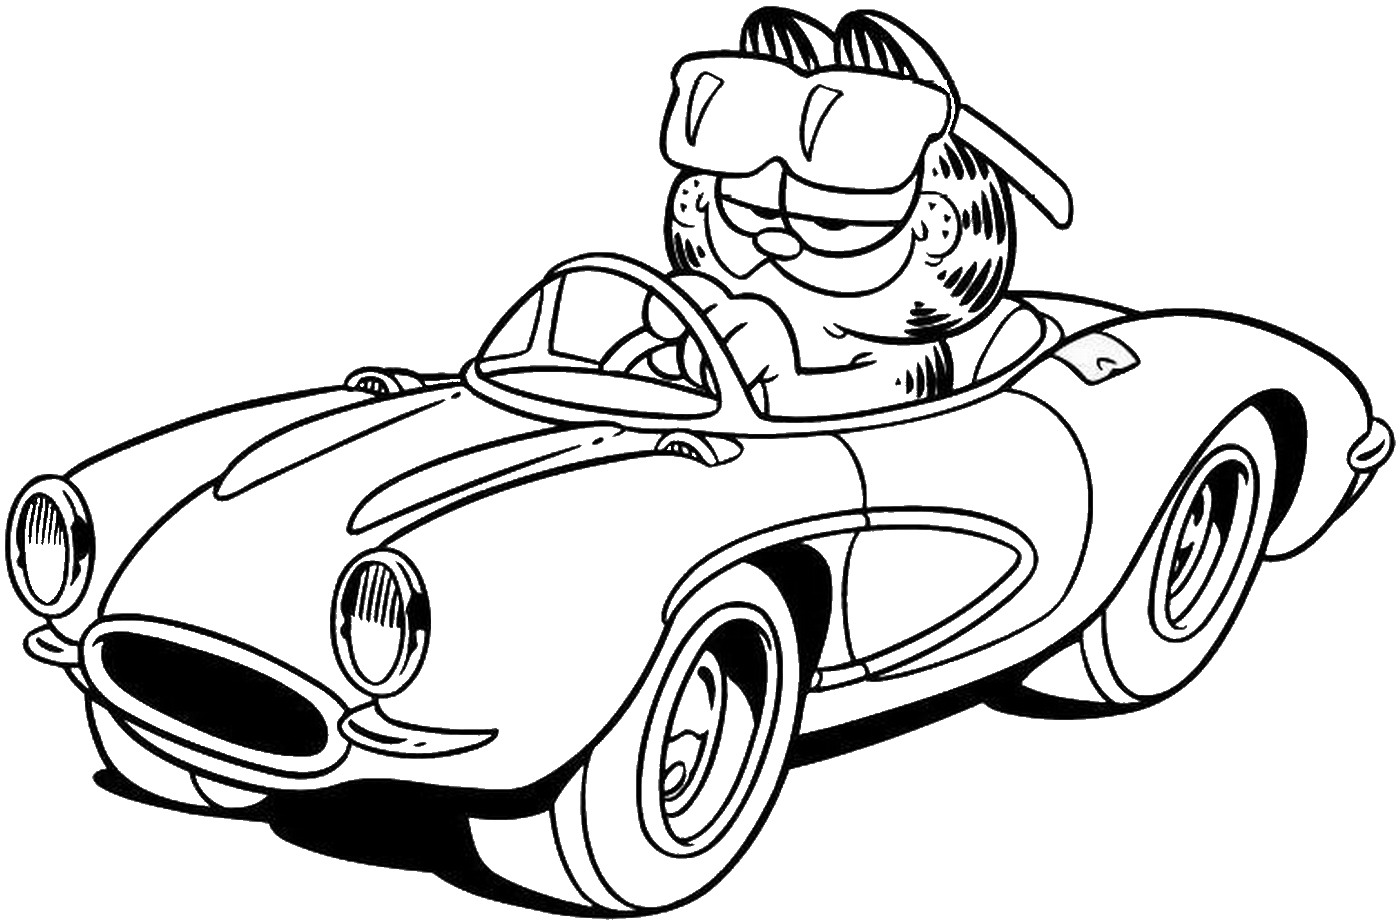 Garfield On The Car Coloring Page   Free Printable Coloring Pages ...